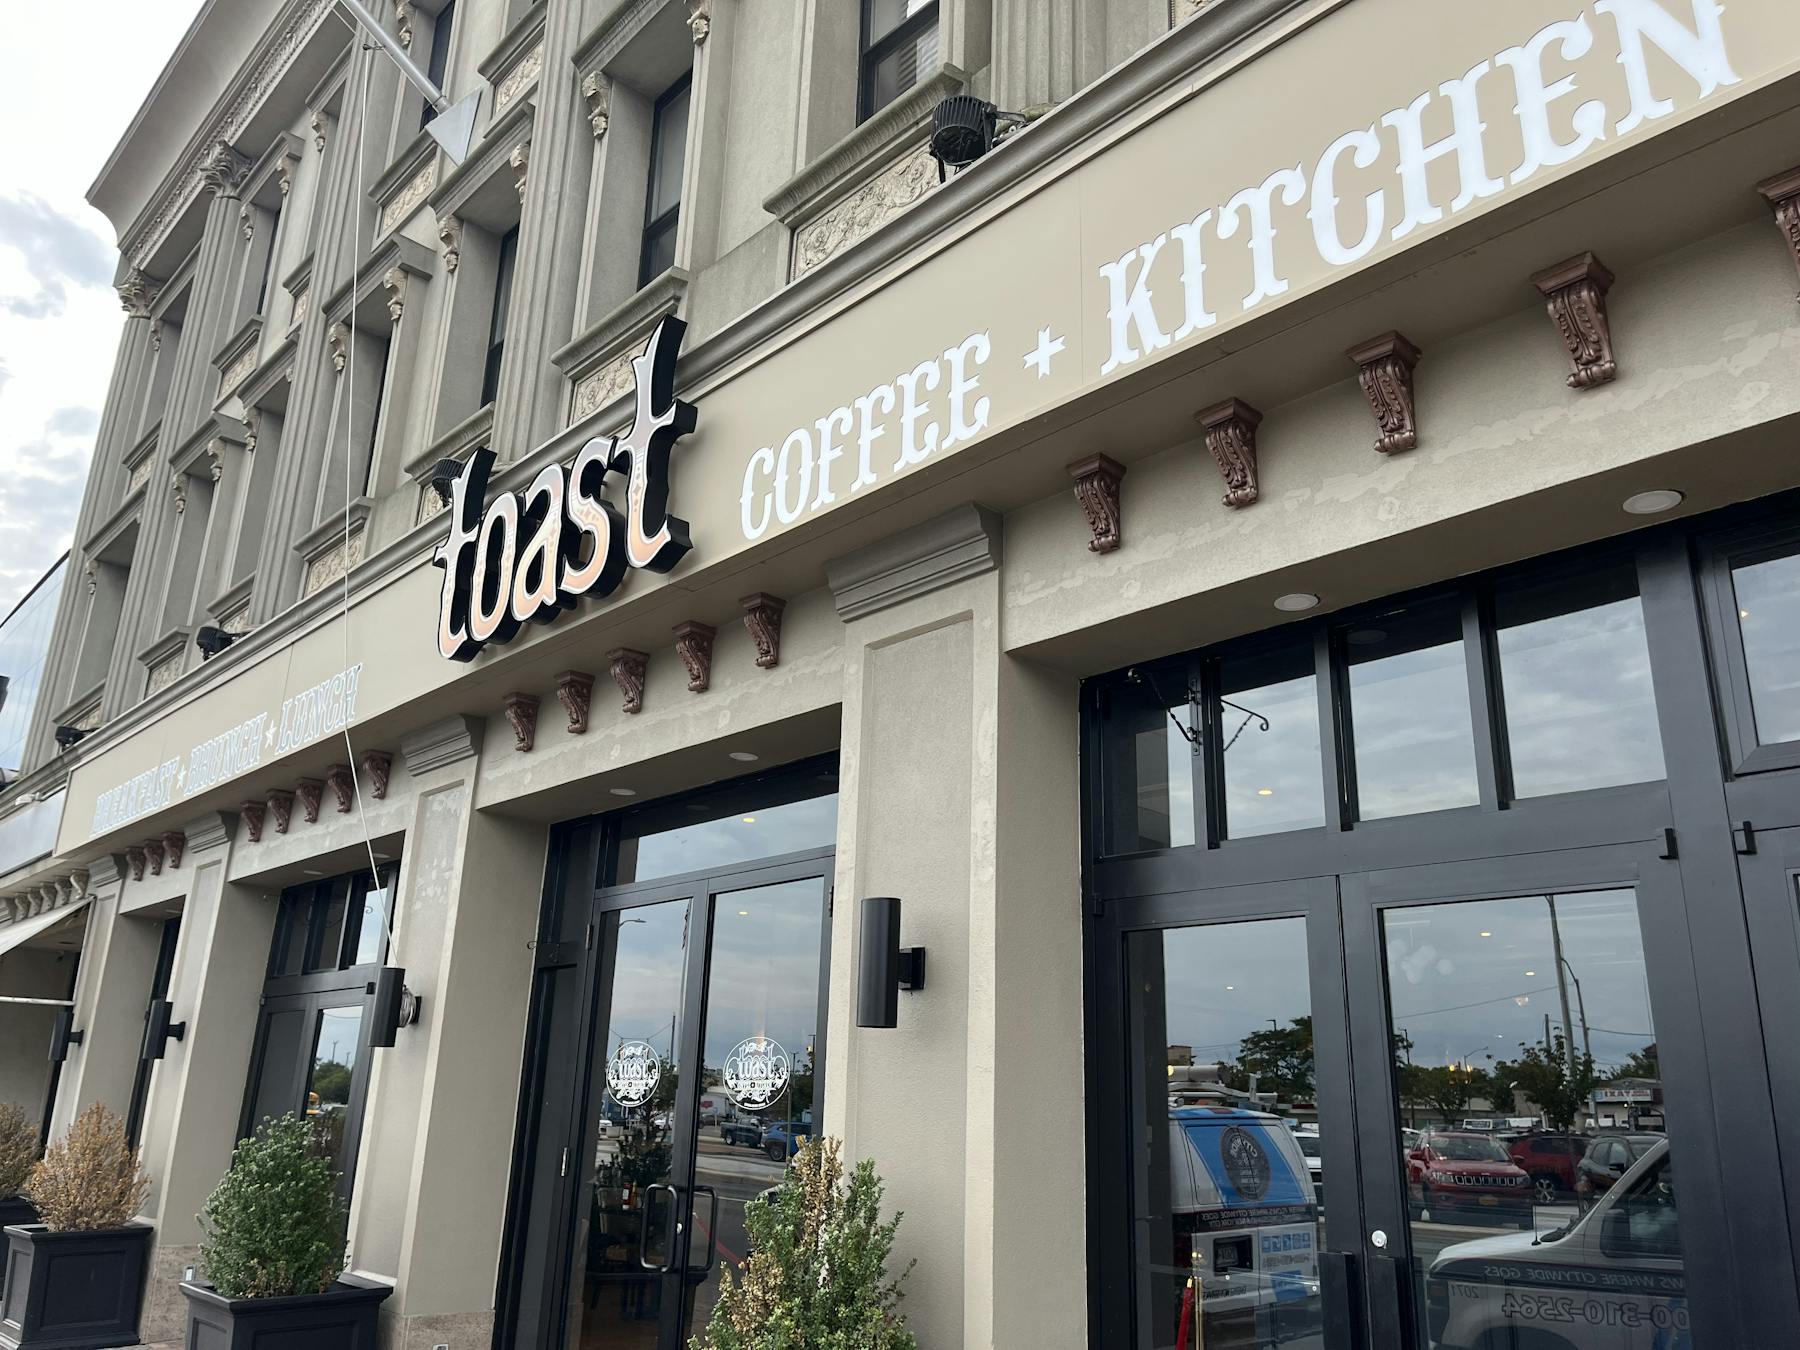 Toast Coffeehouse - Patchogue, NY - Spice up your day with our